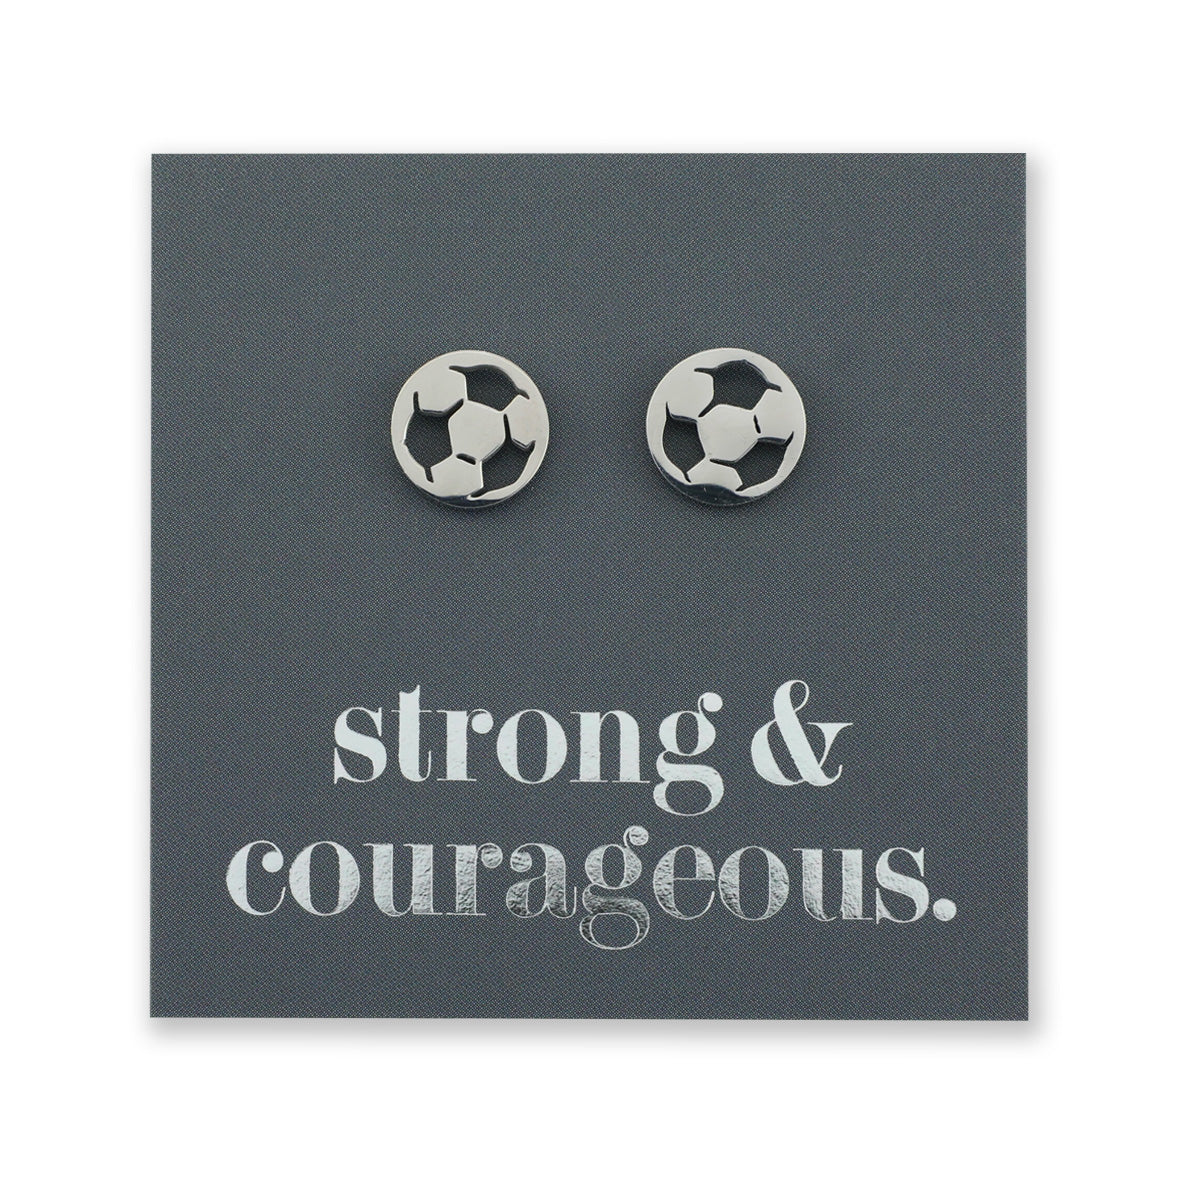 Stainless steel hypoallergenic soccer foorball stud earring, presented on a foil card that says strong and courageous. 